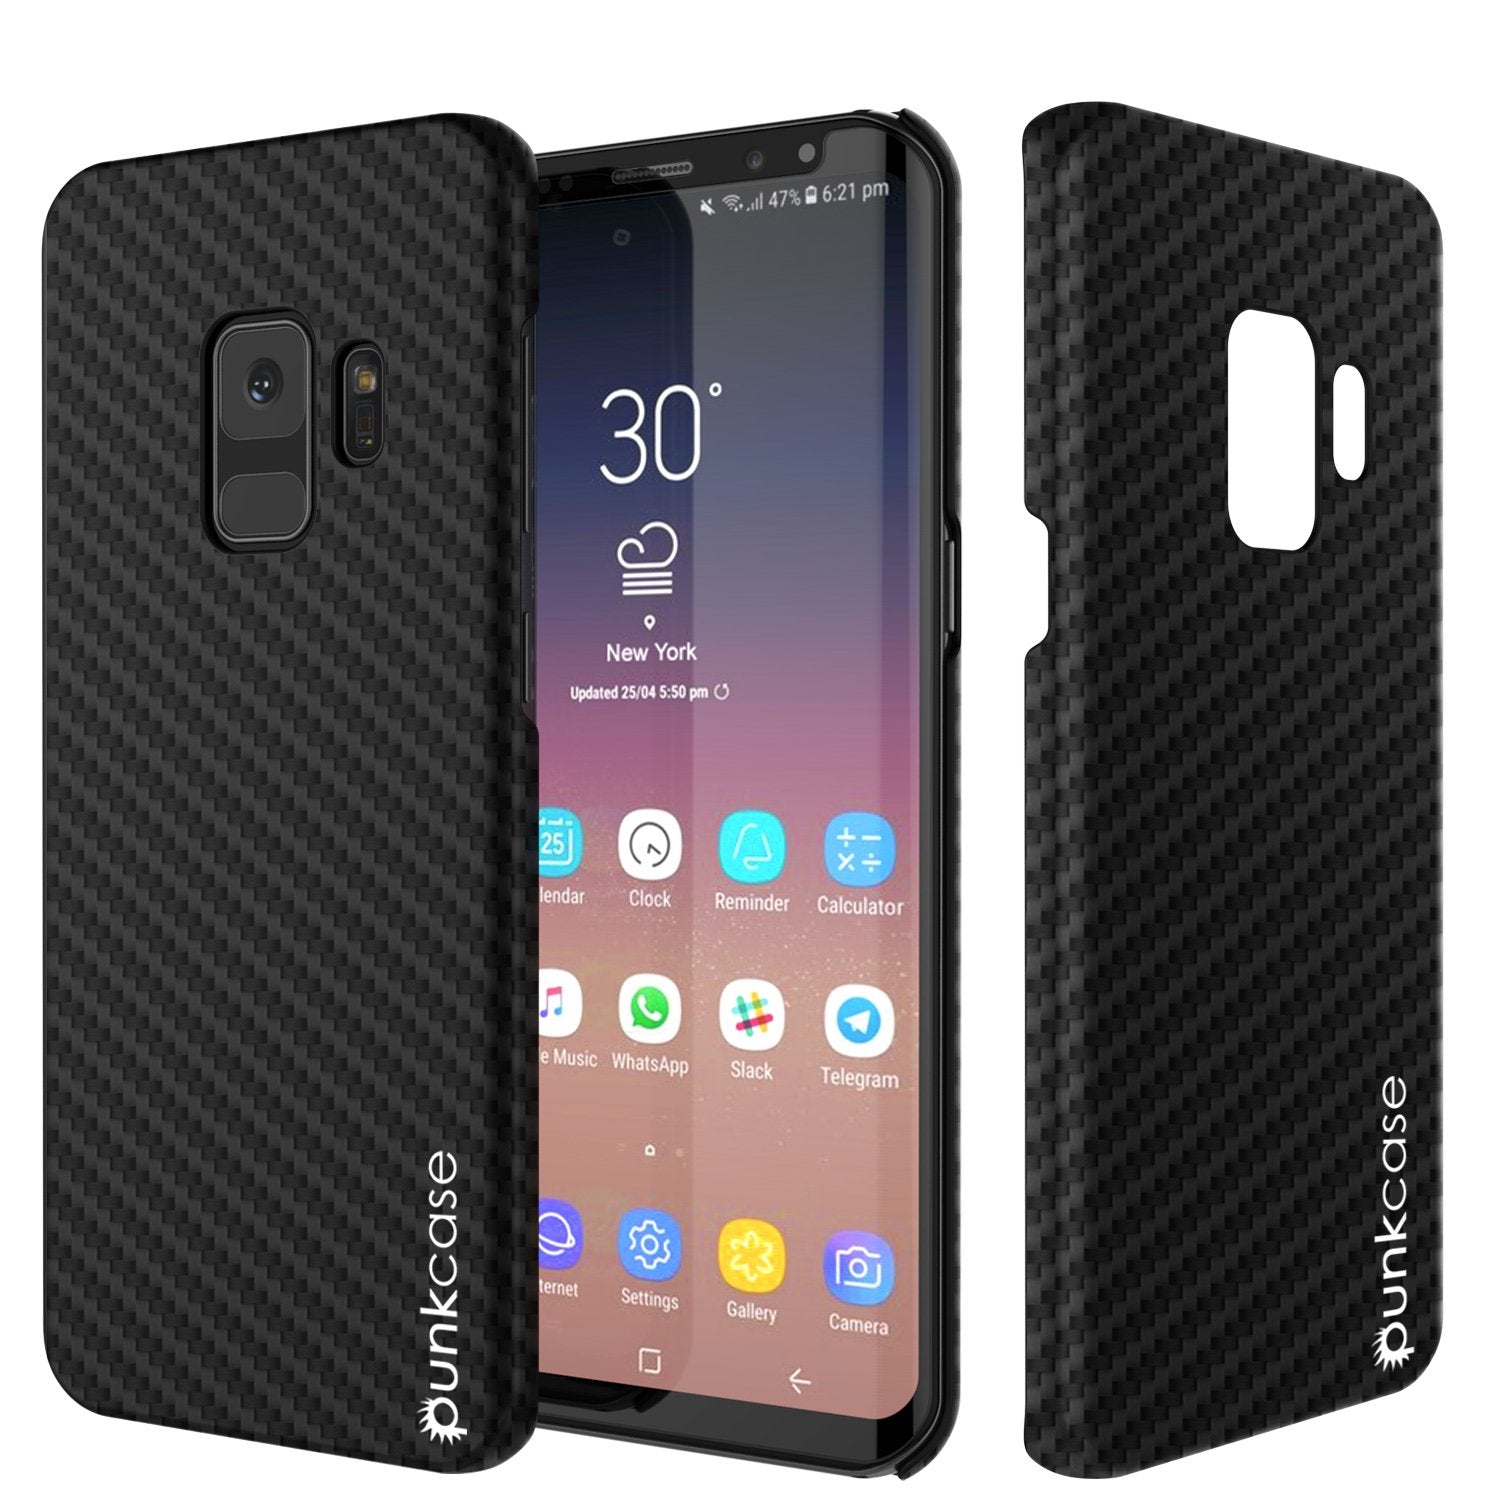 Galaxy S9 Case, Punkcase CarbonShield, Heavy Duty & Ultra Thin 2 Piece Dual Layer PU Leather Cover [shockproof][non slip] with PUNKSHIELD Screen Protector for Samsung S9 [jet black]